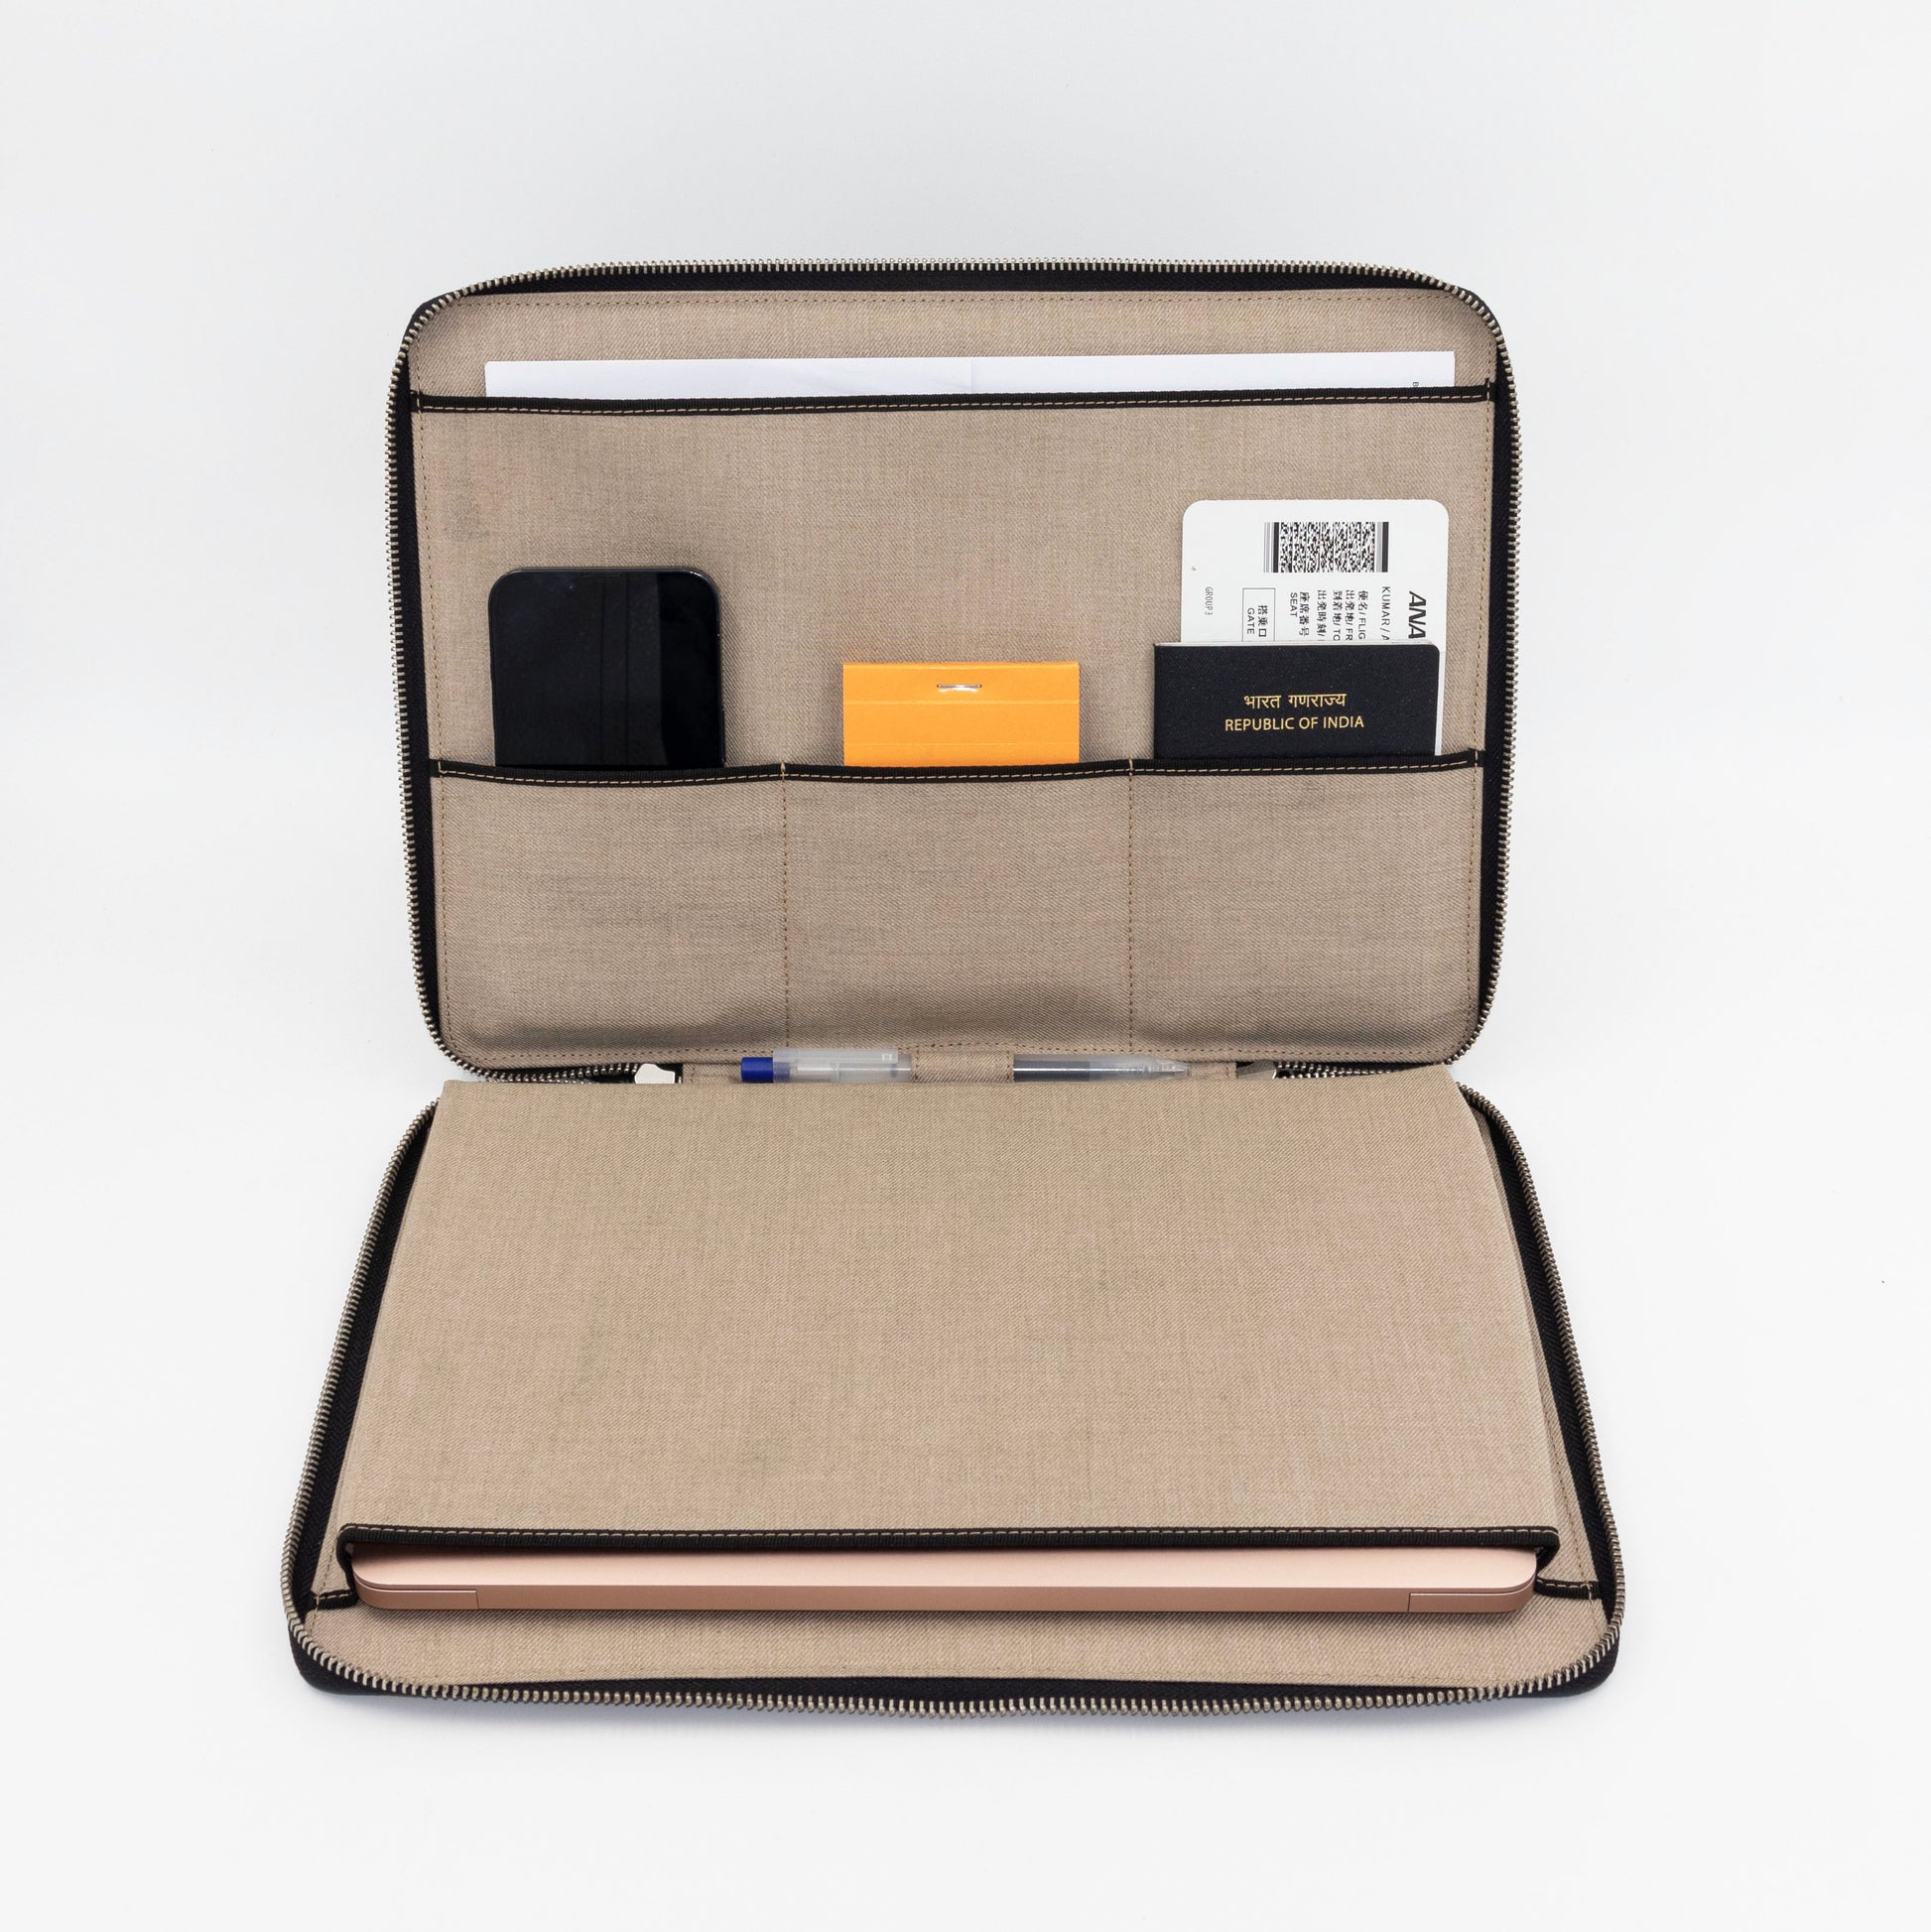 Interior of the laptop case can hold documents and slim notebooks